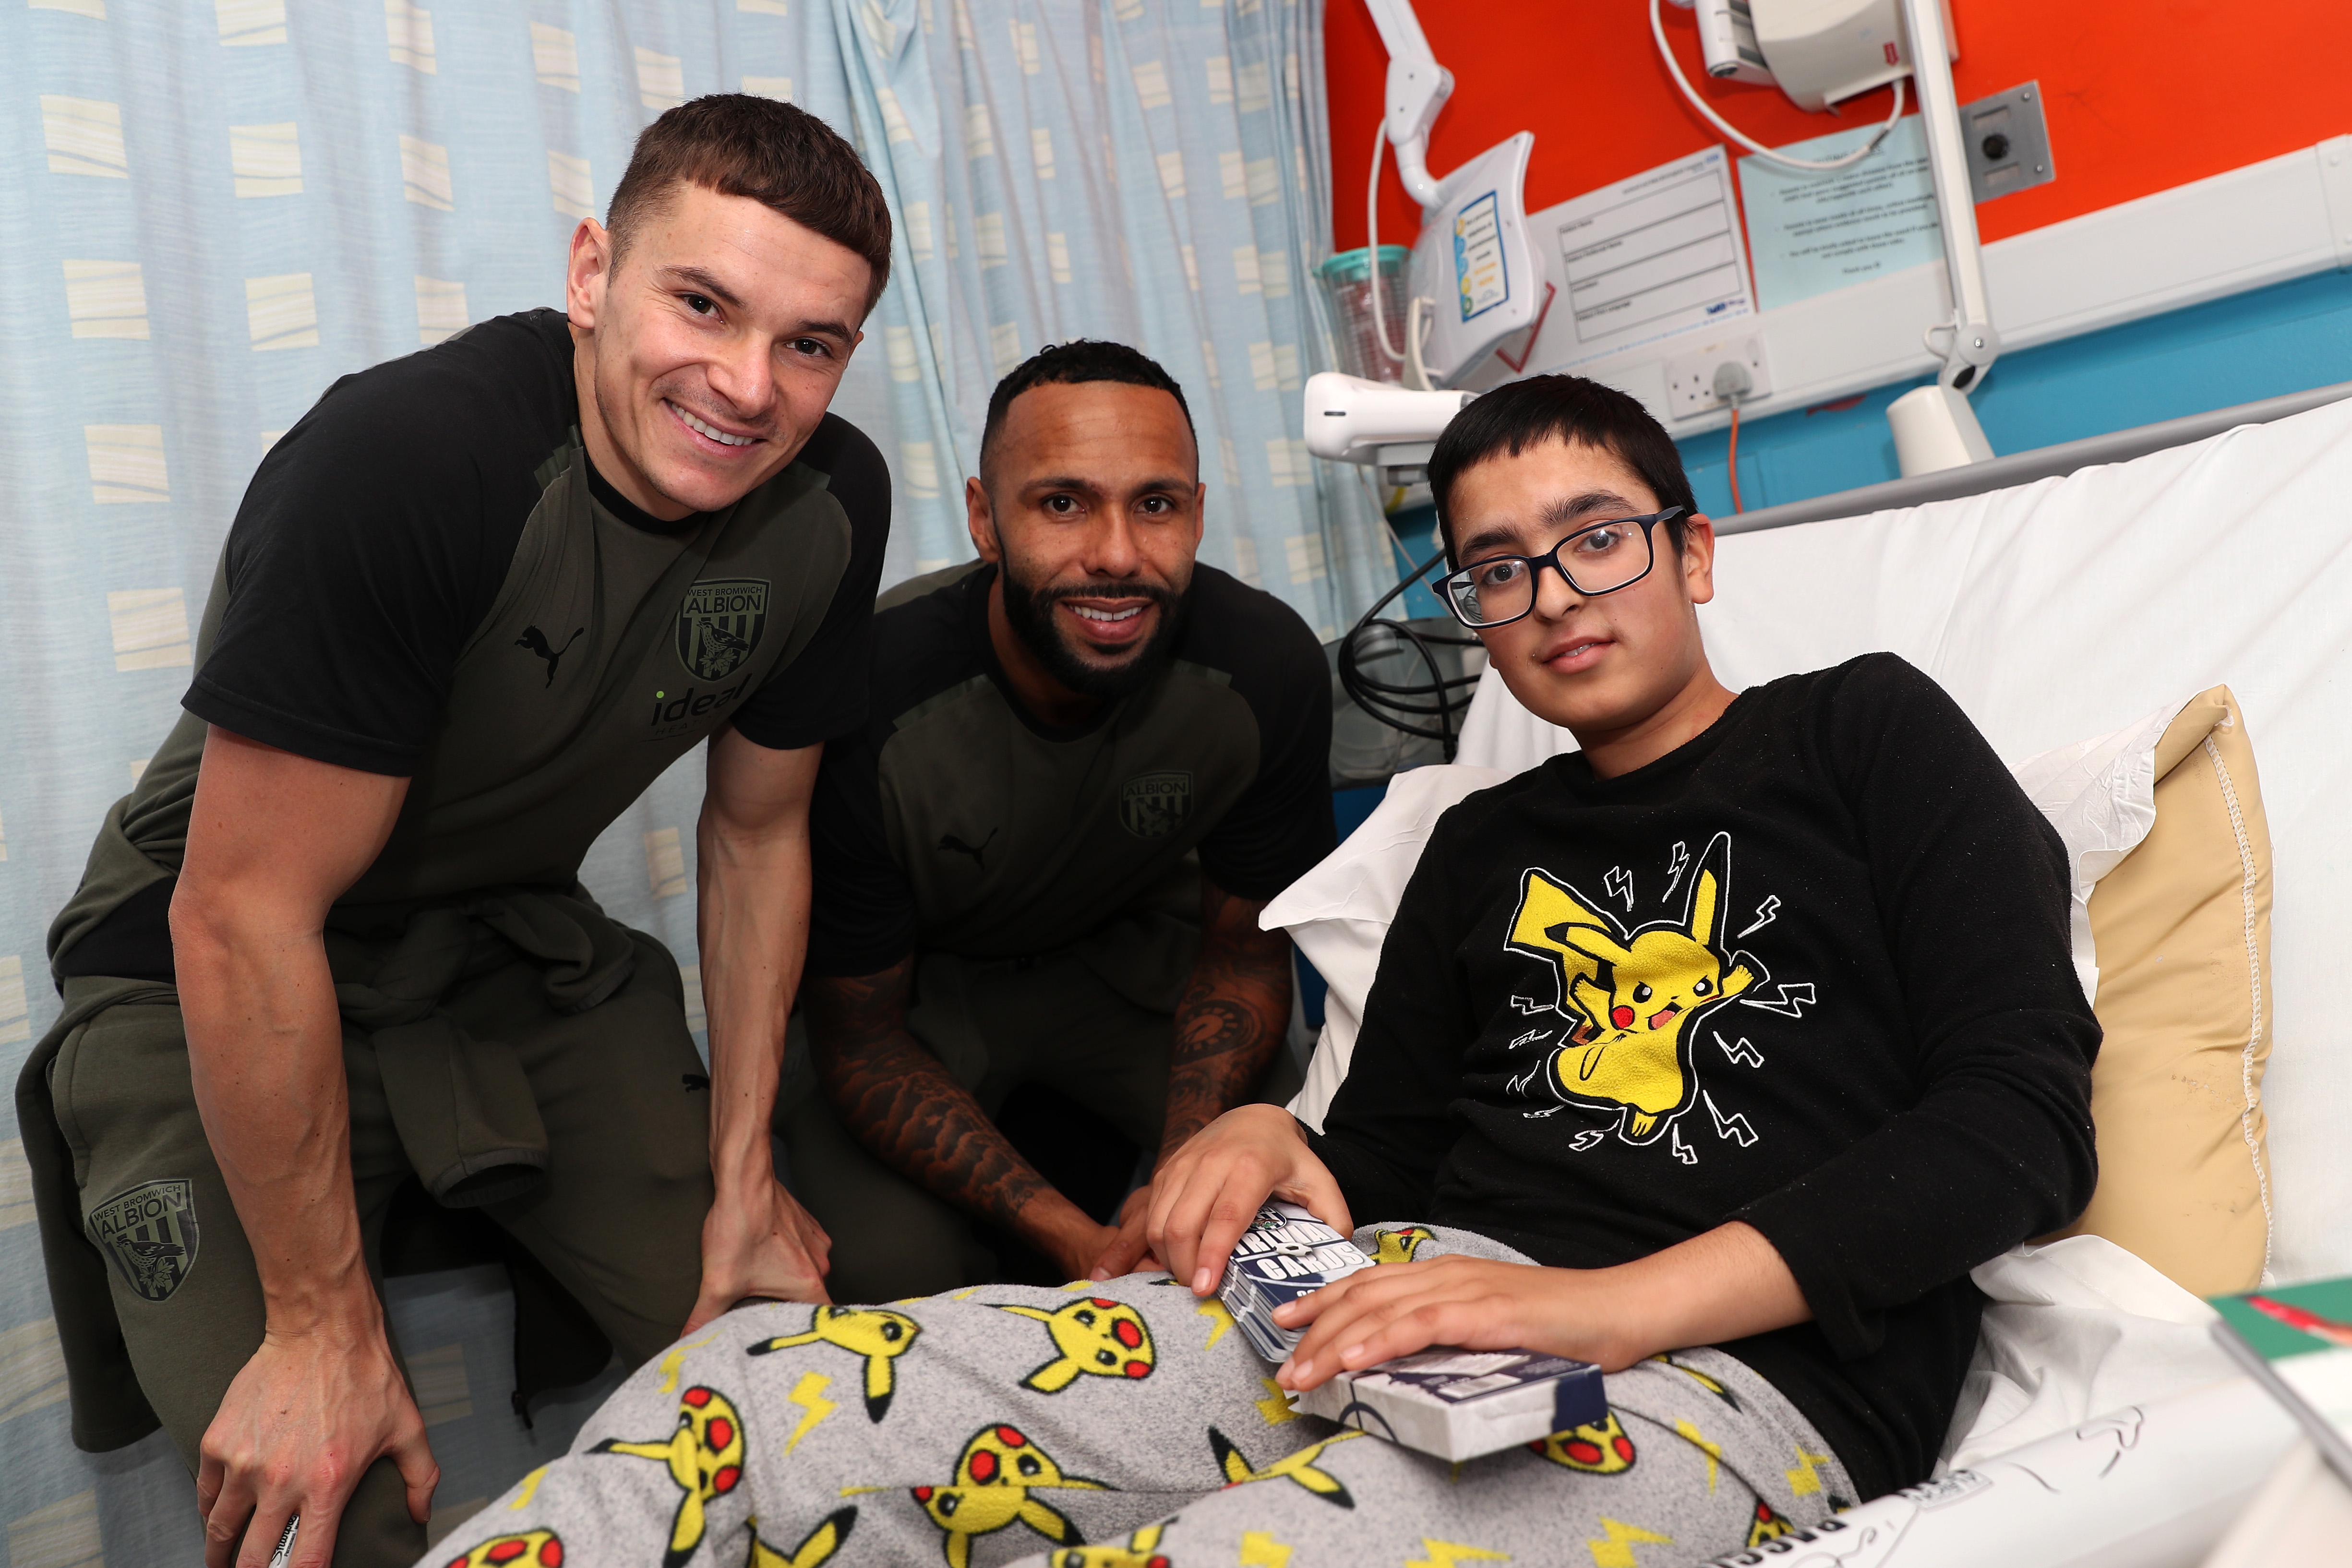 Conor Townsend and Kyle Bartley pose for a photo with patients at Sandwell General Hospital